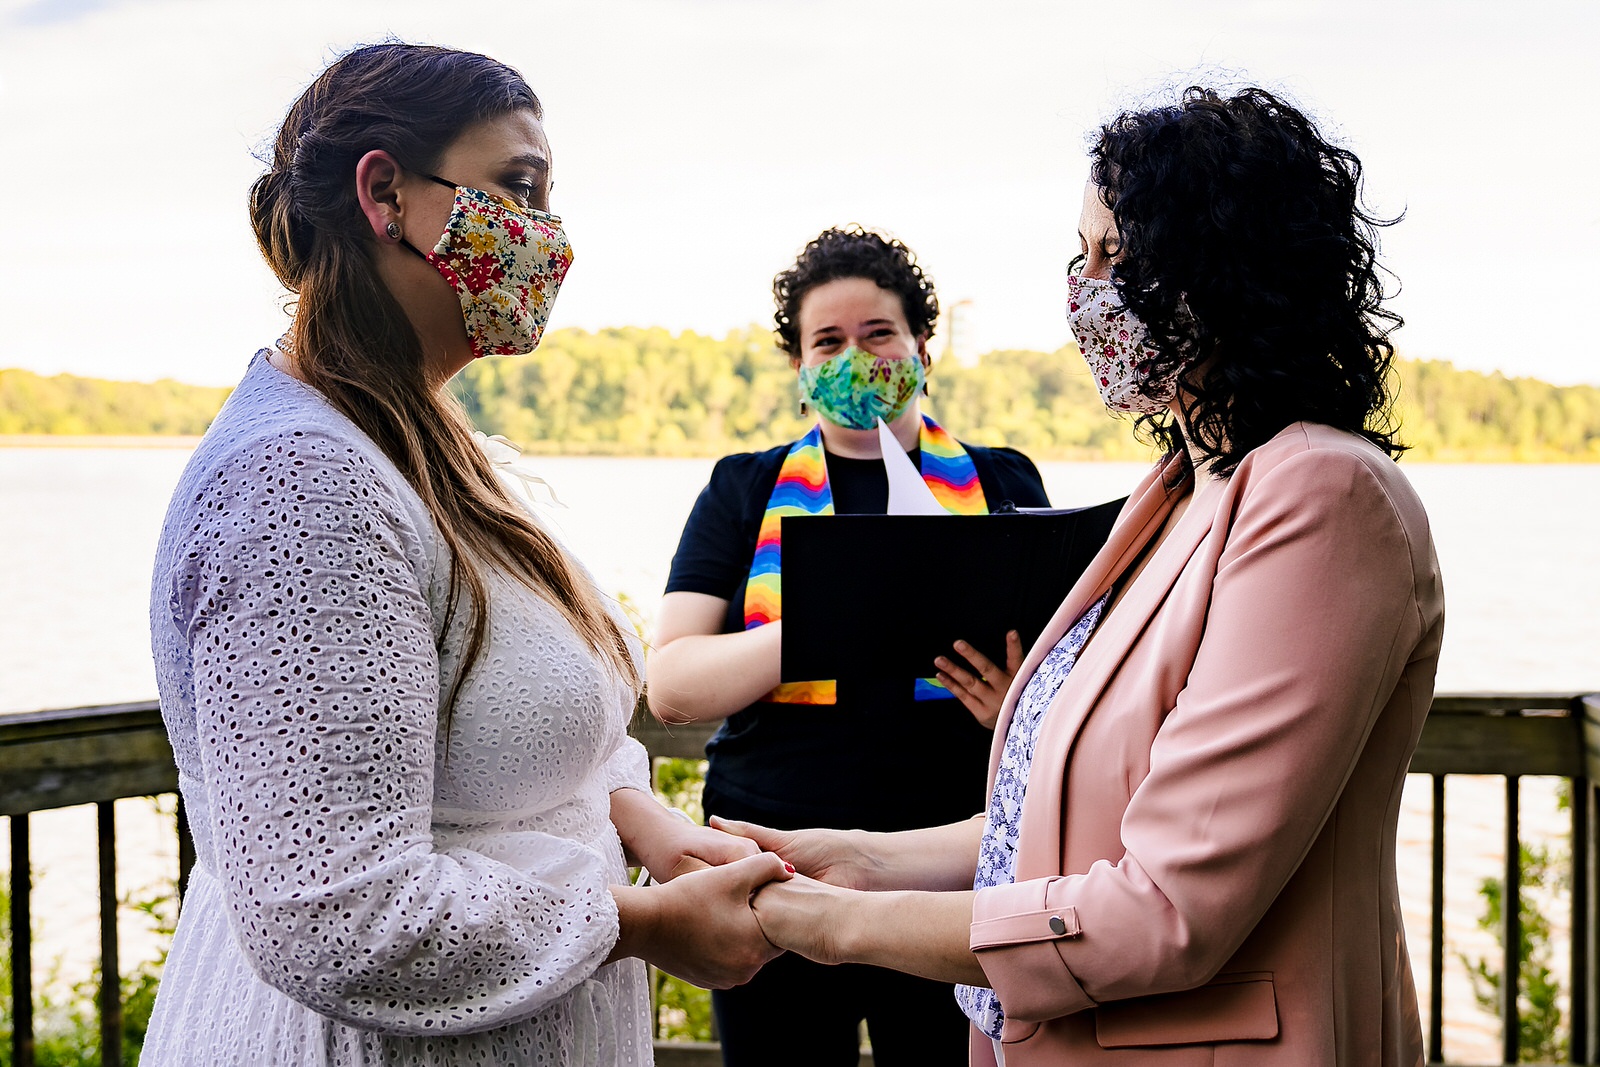 Same-sex elopement wedding ceremony by Raleigh wedding photographers Kivus & Camera. The officiant is Magical Weddings by Carly